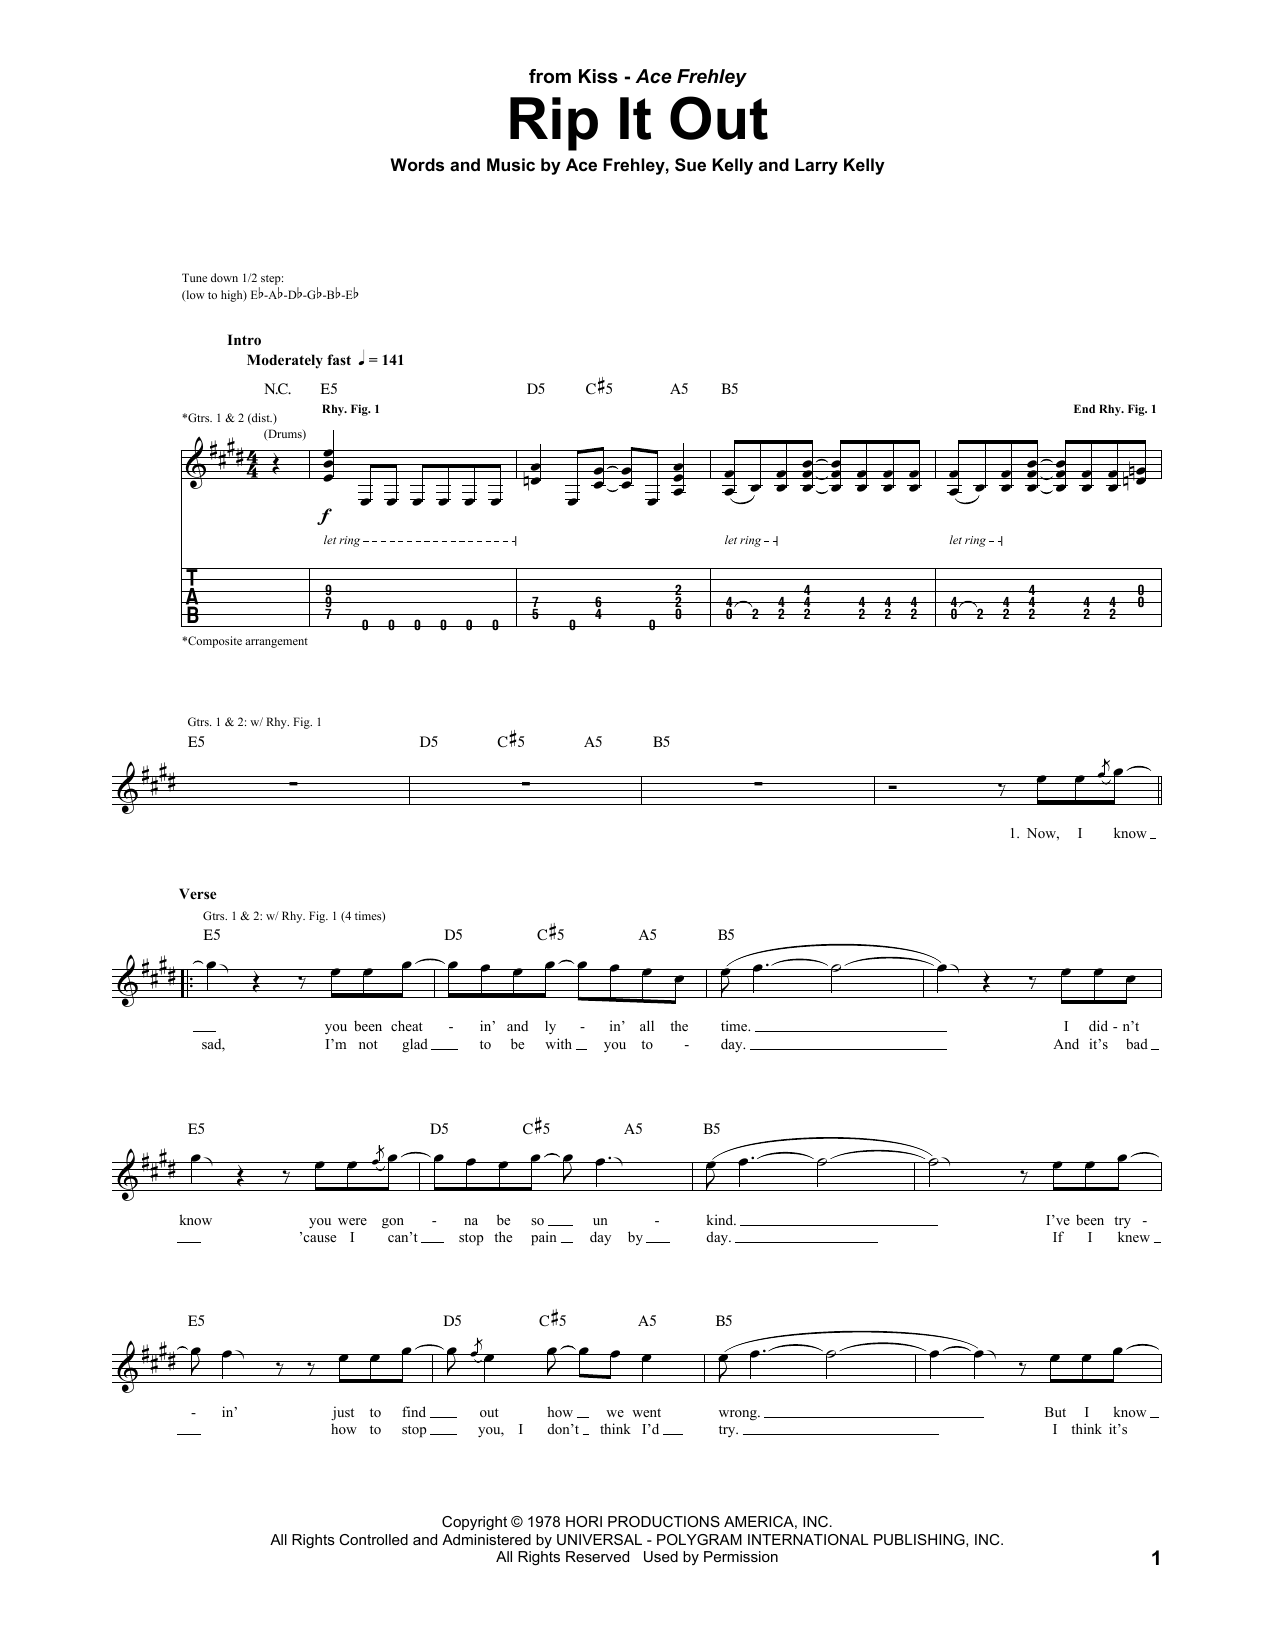 Download KISS Rip It Out Sheet Music